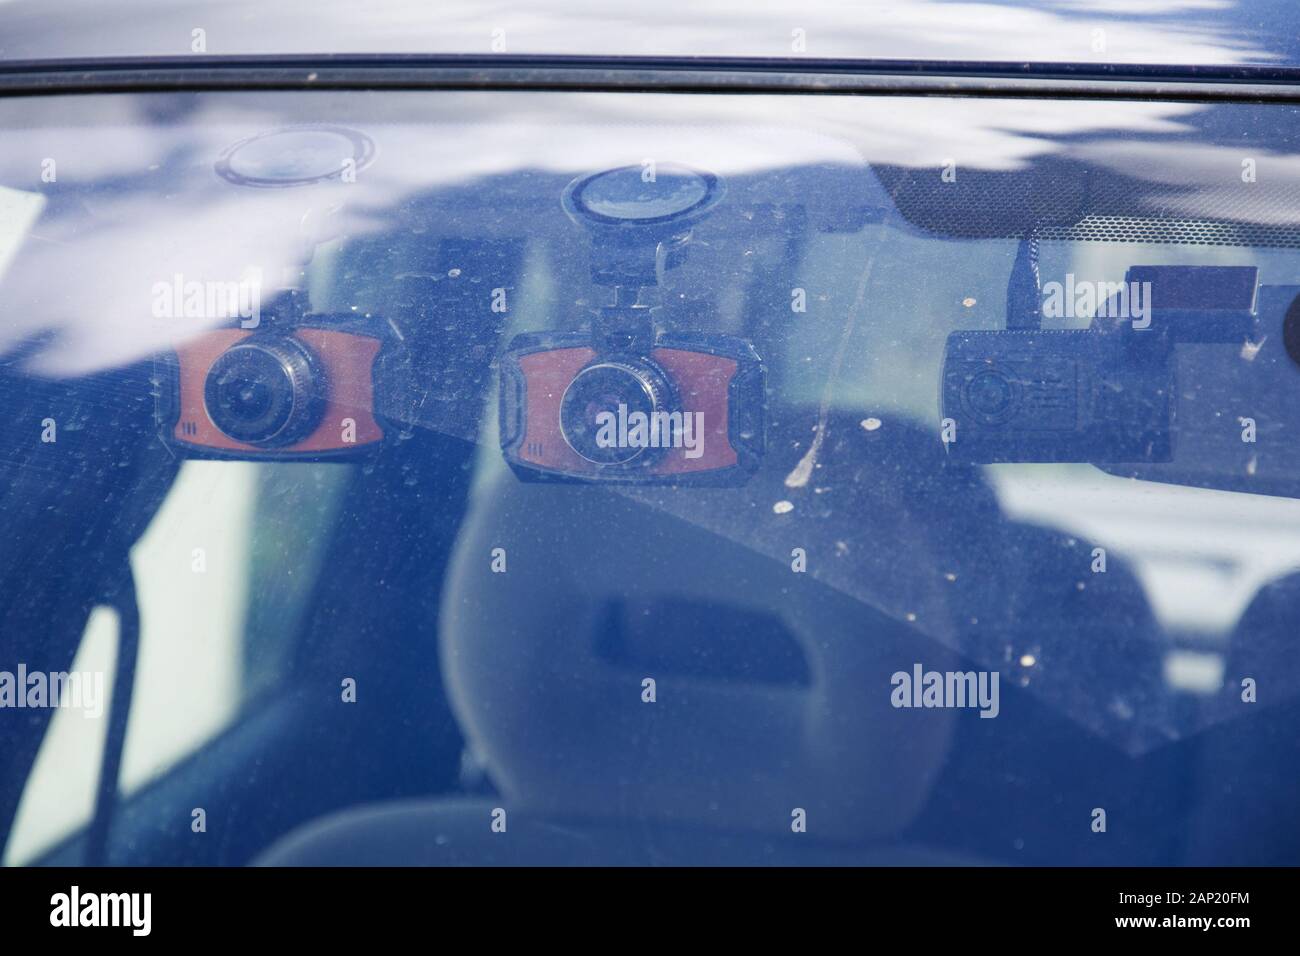 Three dashboard camera mounted on the dirty front windshield. Car Camera DVR Dash Cam for safety on the road accident. View from outside the car. Stock Photo